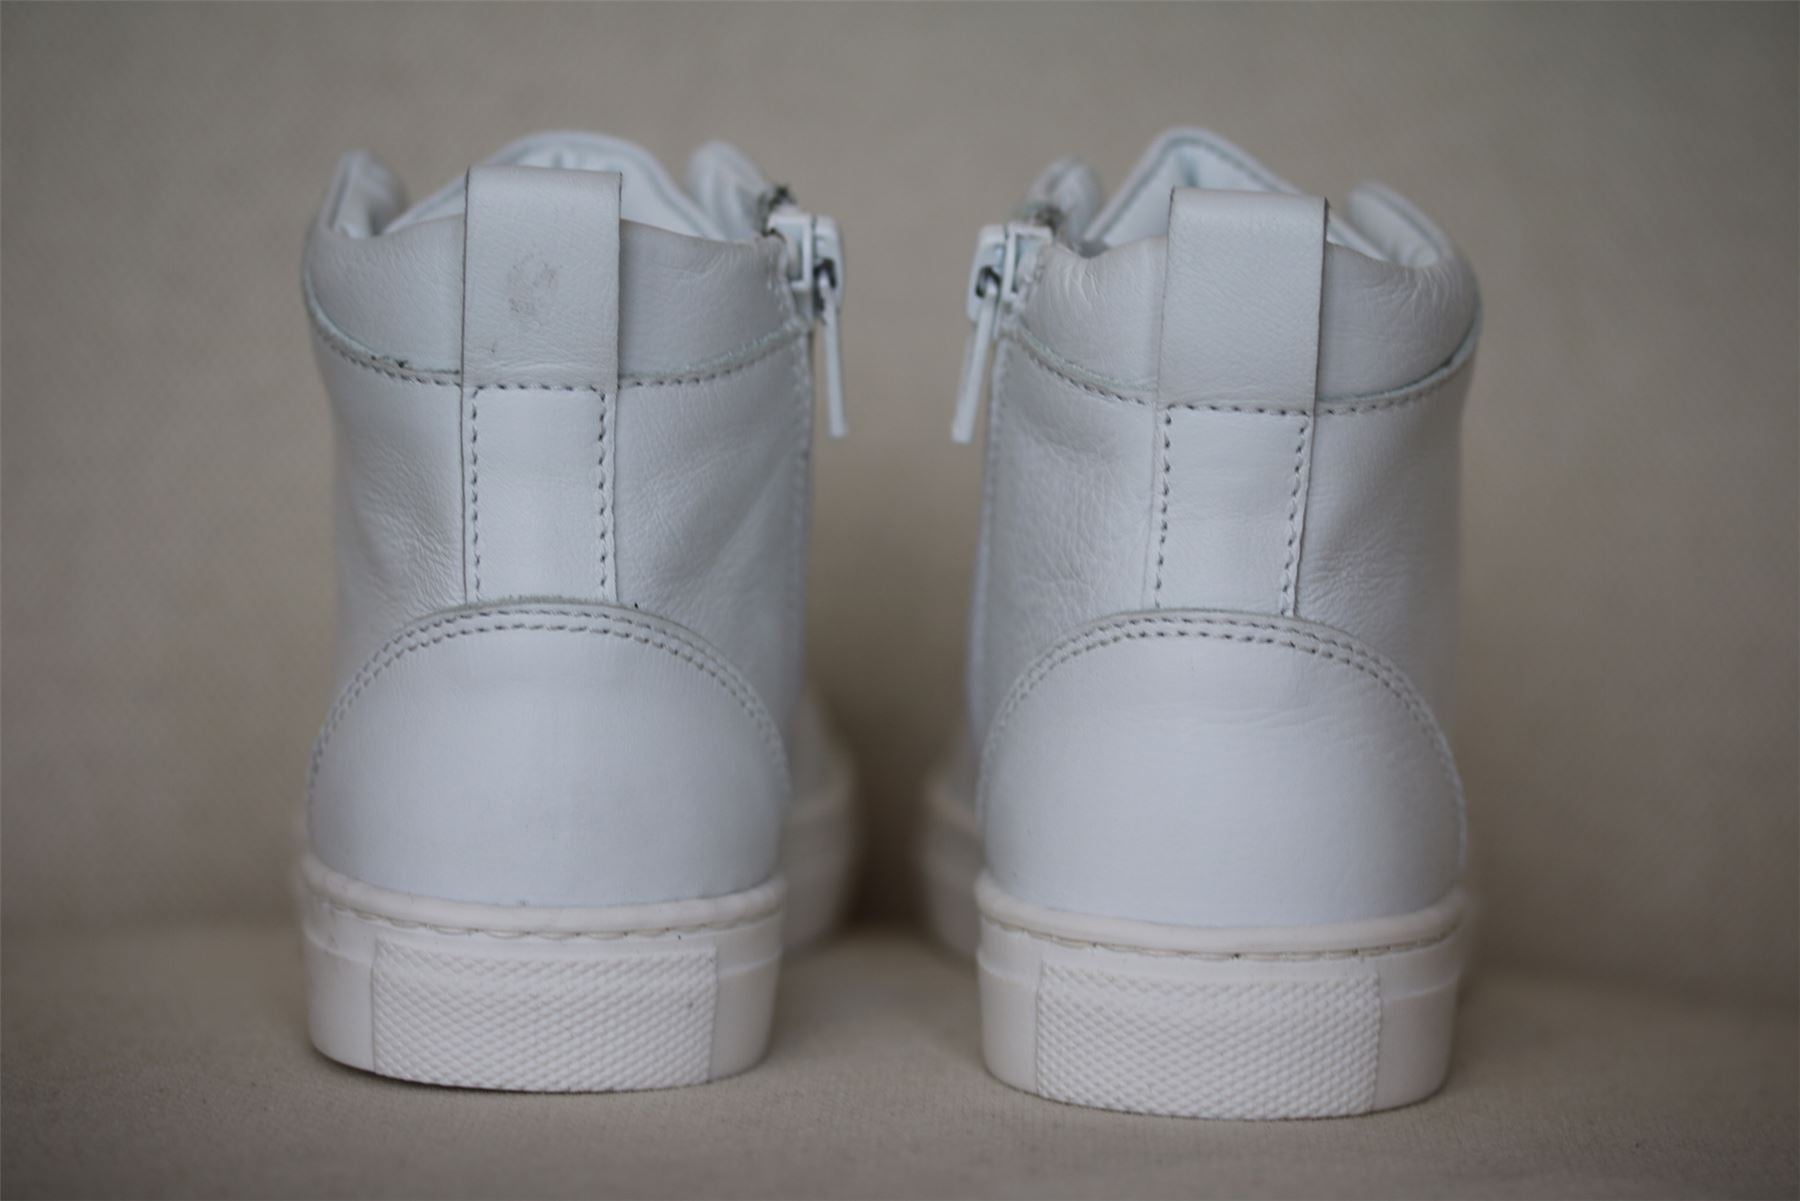 LANVIN GIRLS WHITE LEATHER HIGH TOP TRAINERS EU 26 UK 8.5